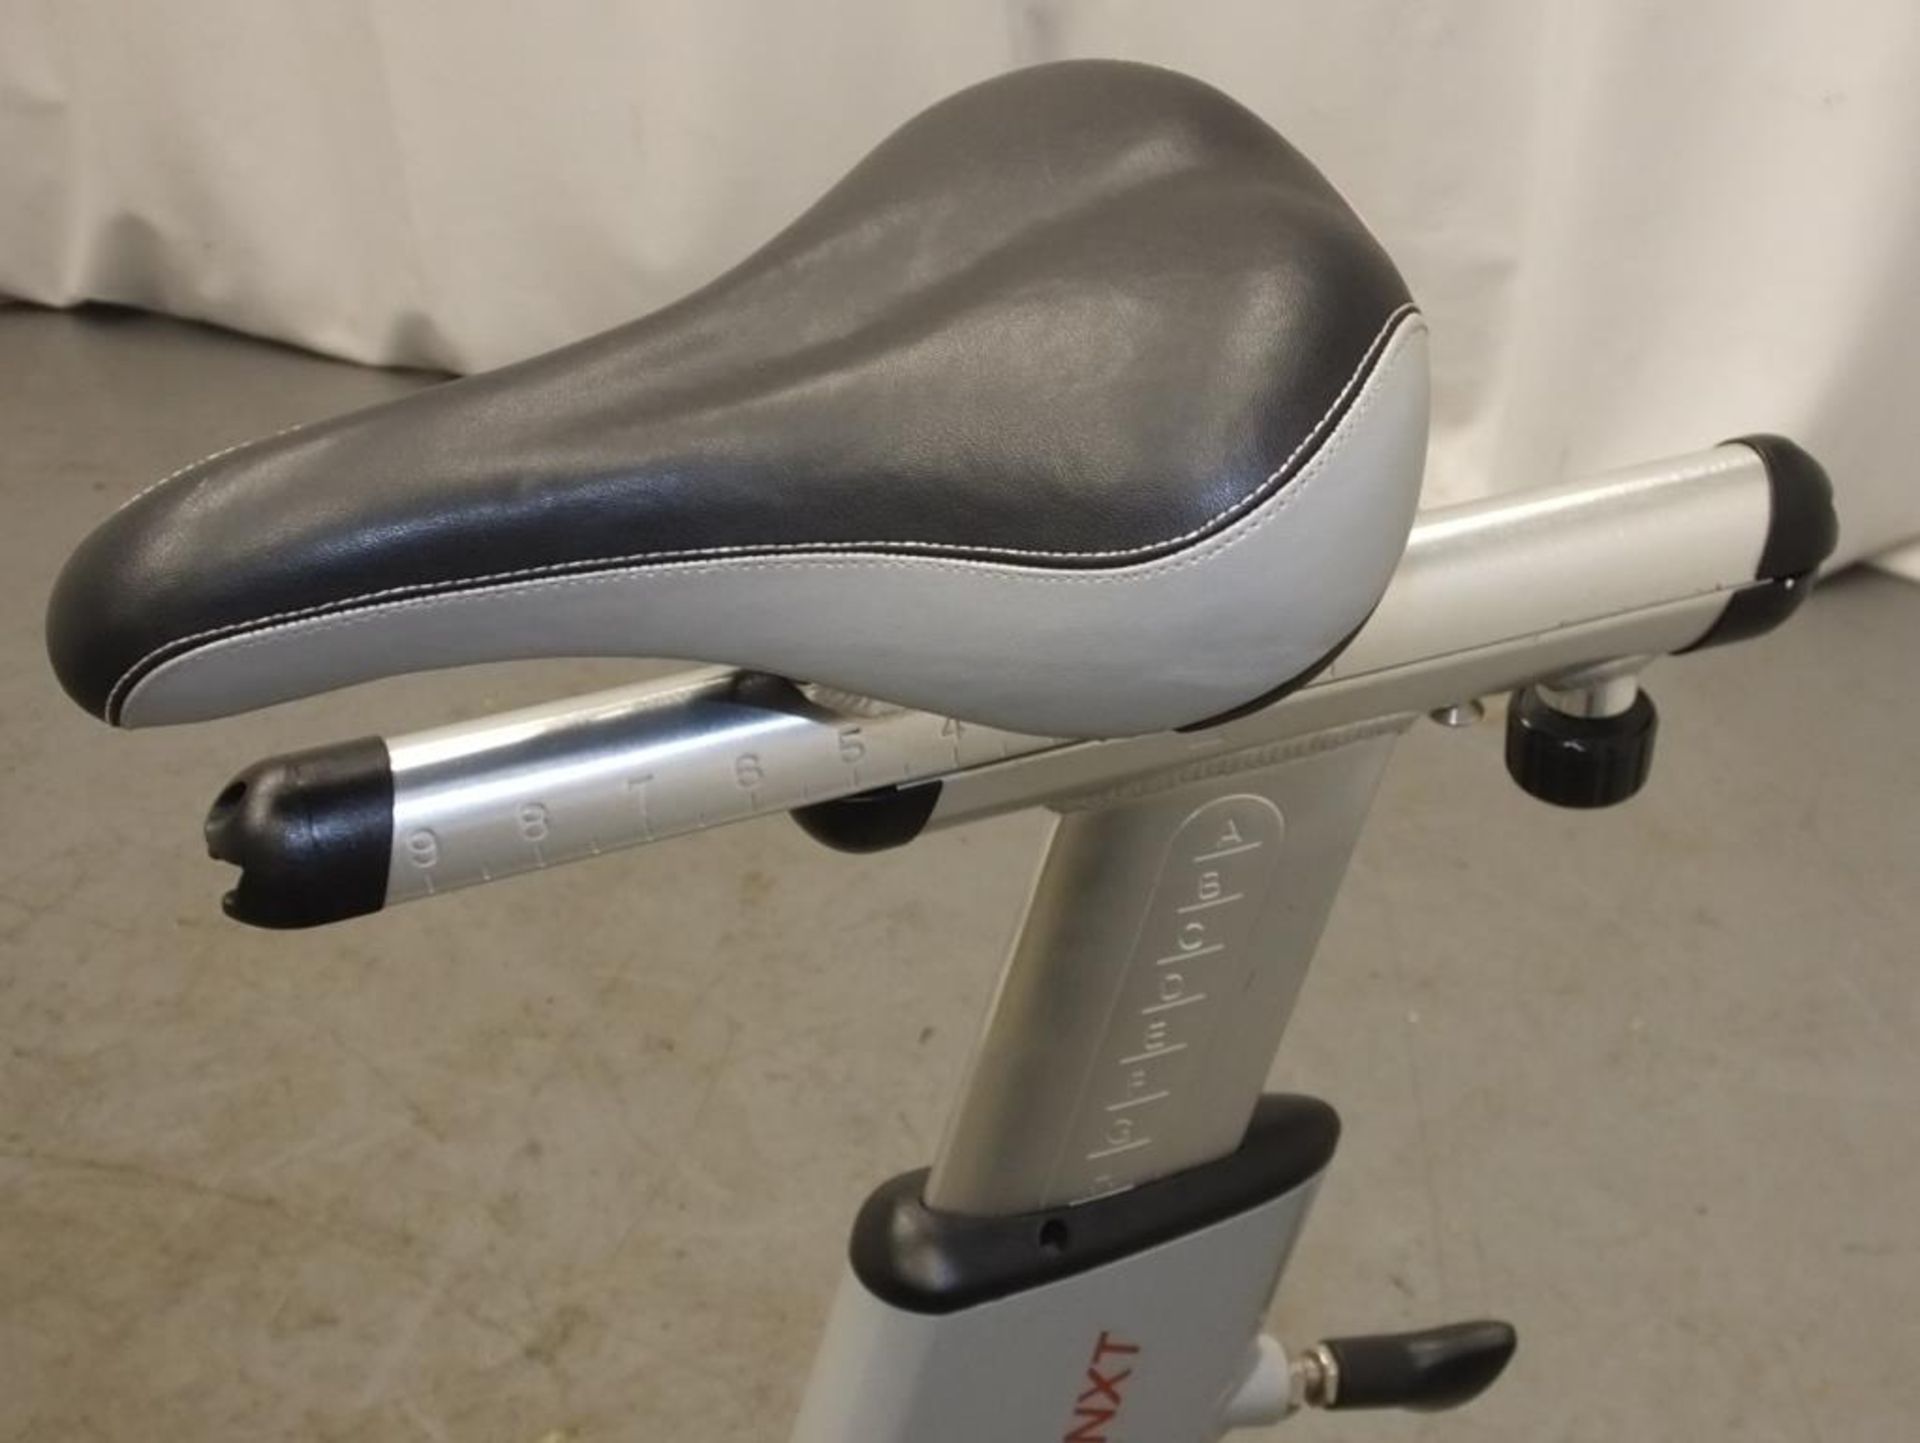 Startrac Spinner NXT Spin Bike - missing pedal - console powers up - functionality untested - Image 4 of 6